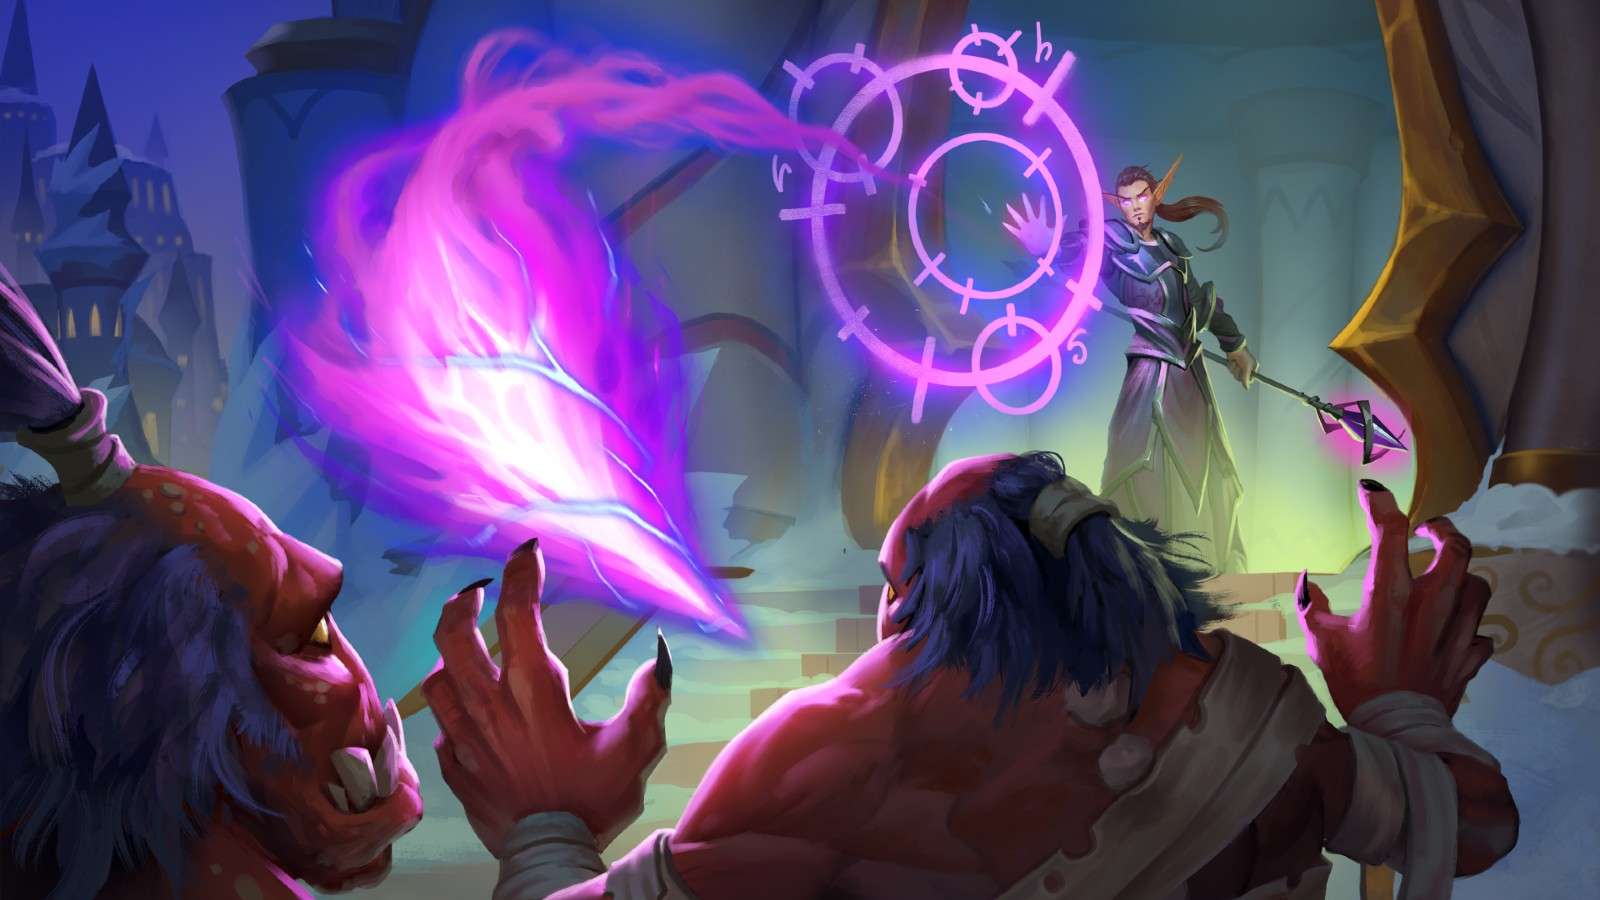 An official image of Hearthstone artwork.